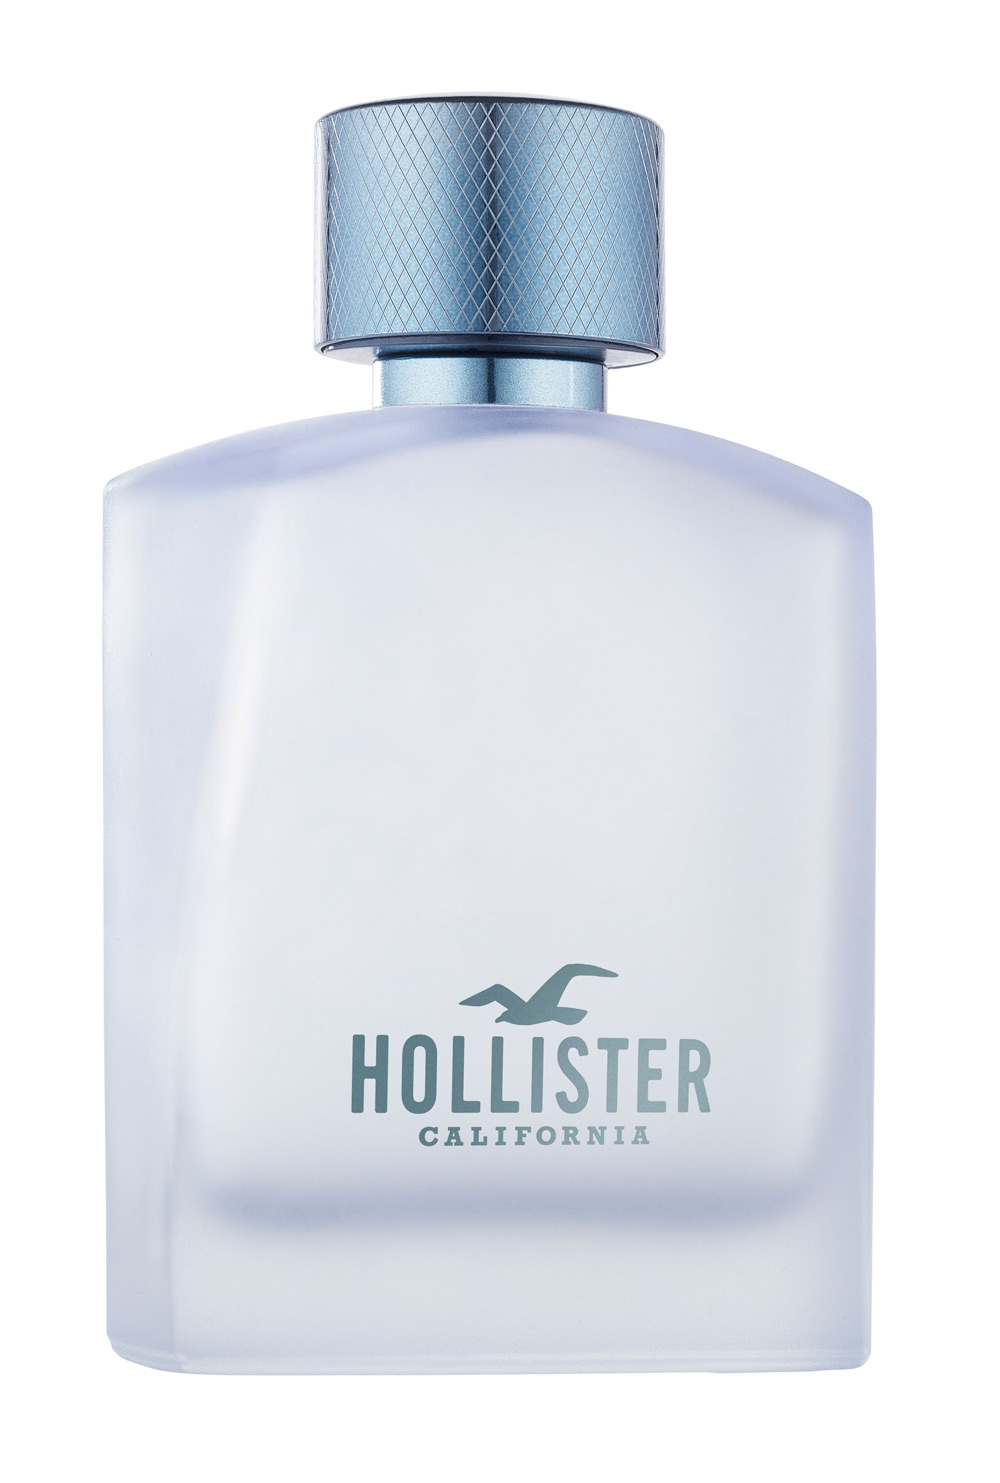 Free Wave For Him Hollister cologne - a 